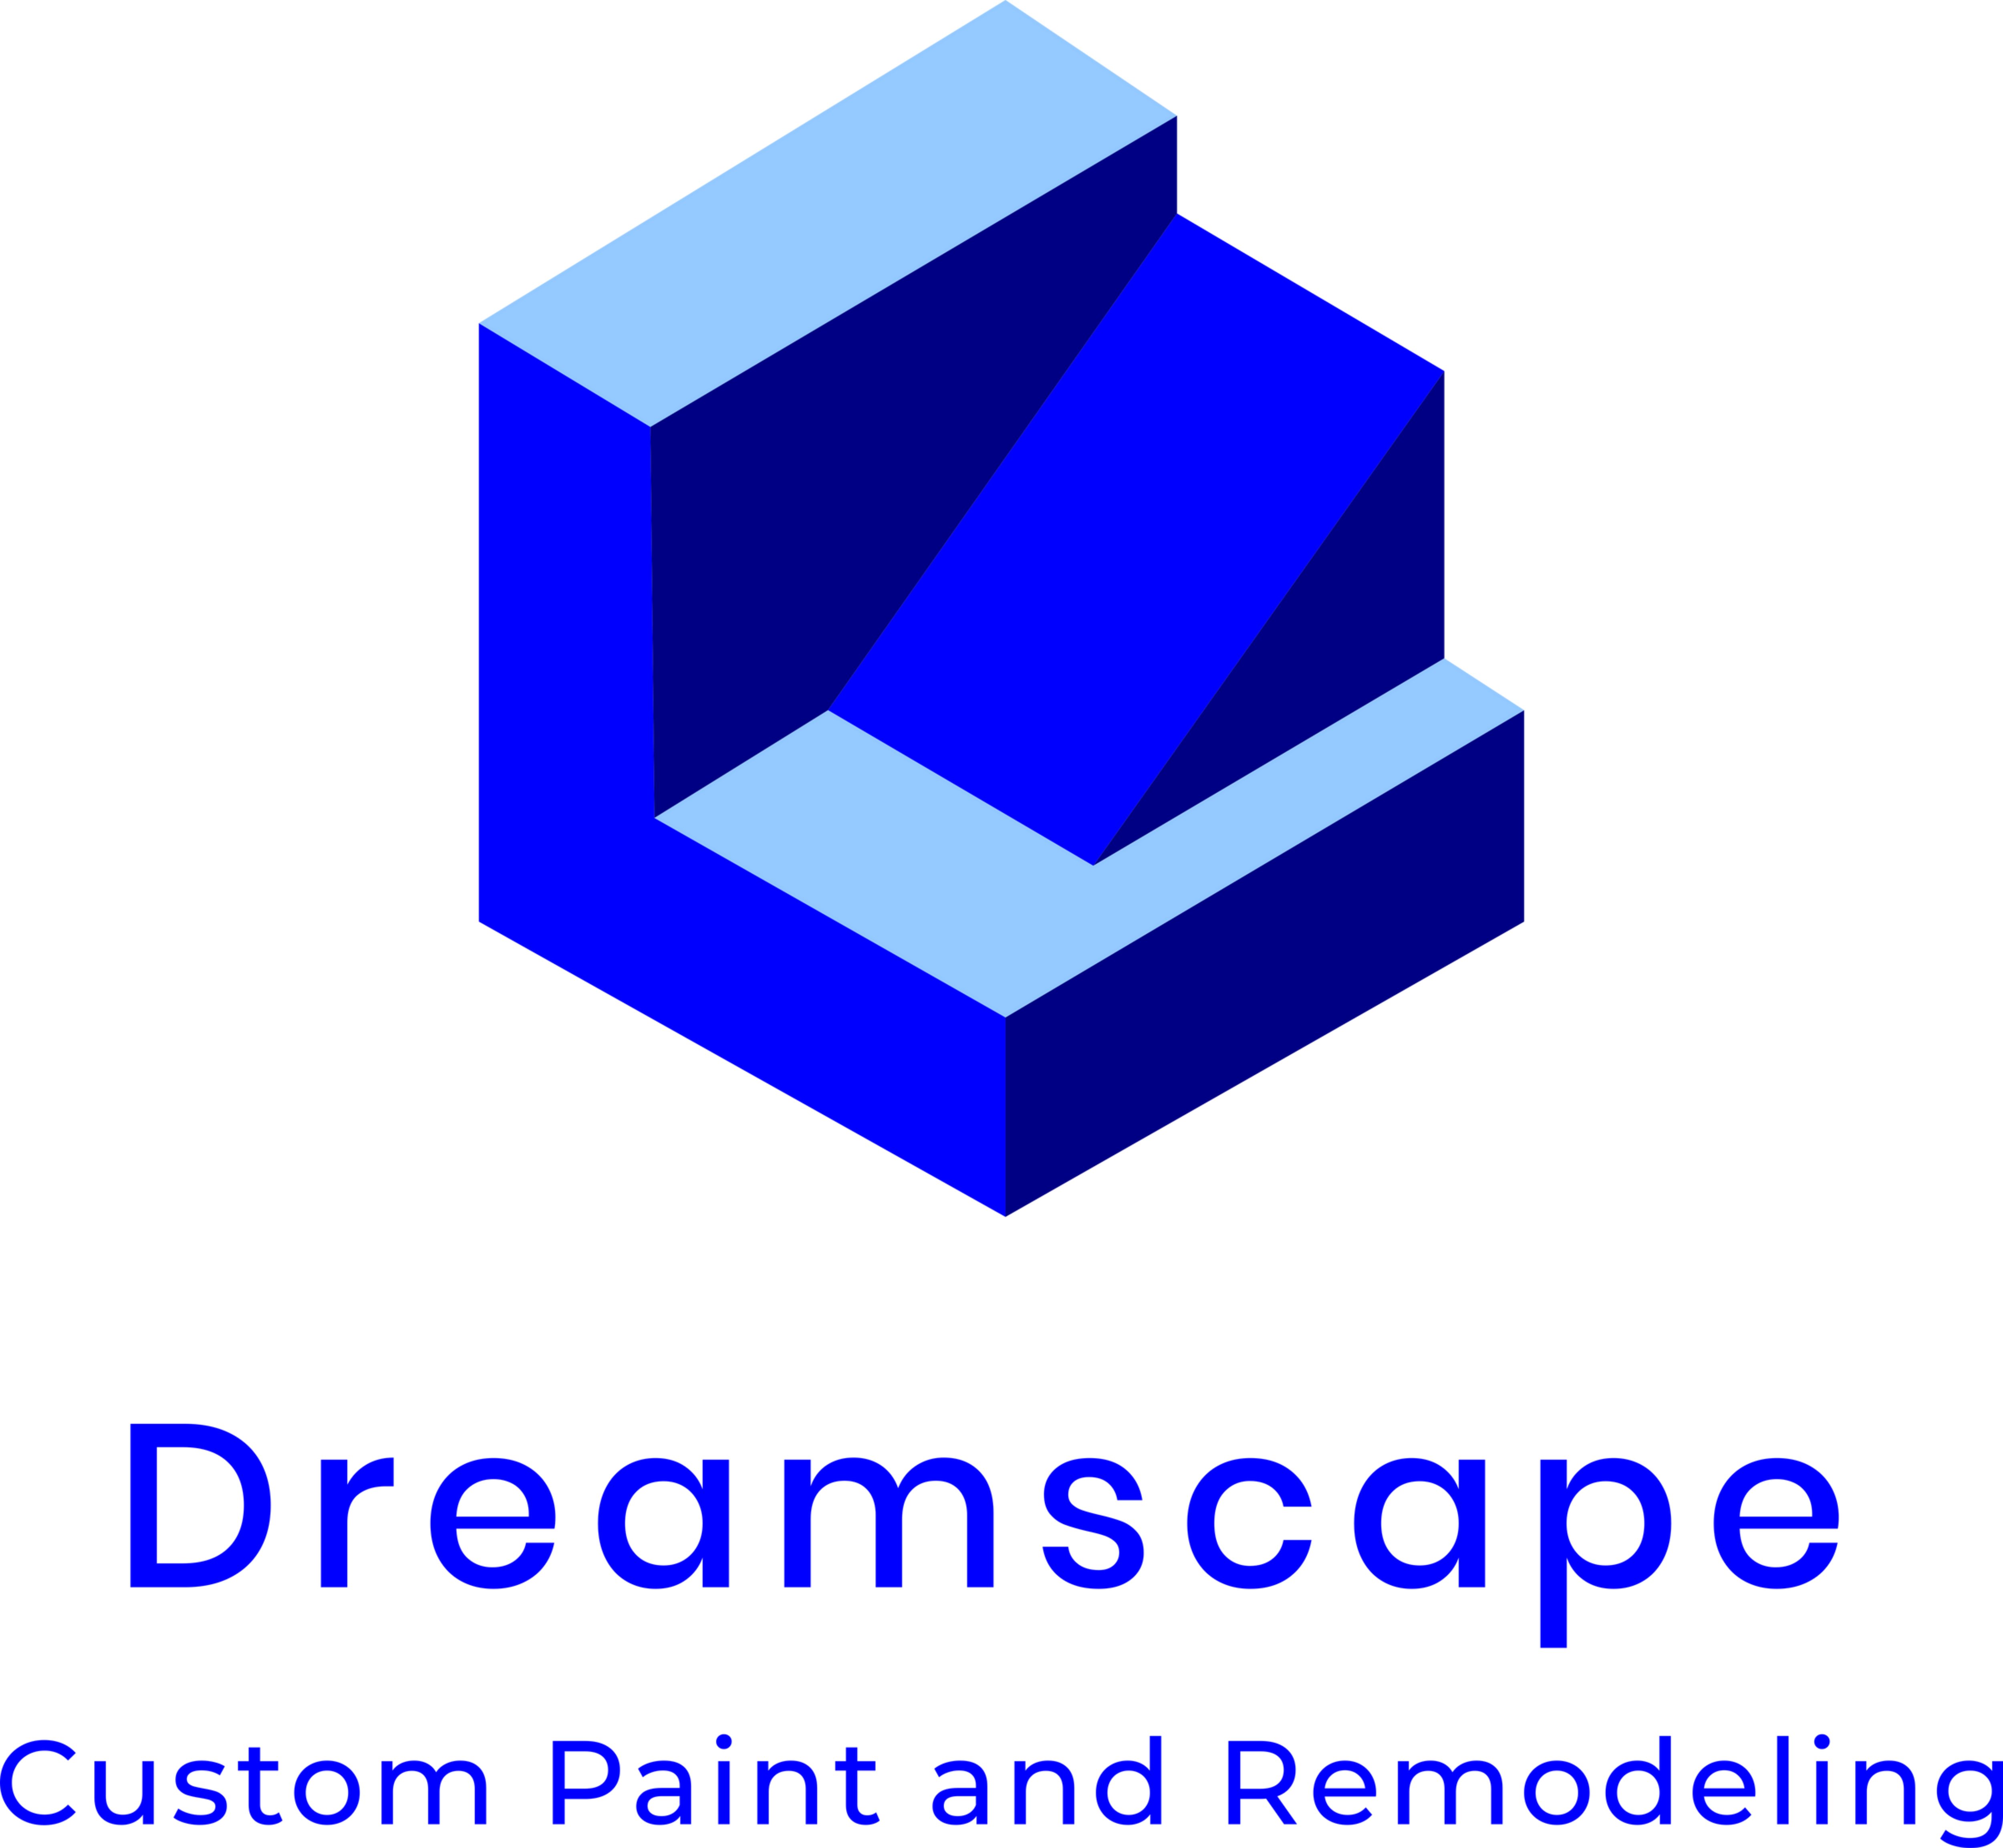 Dreamscape Custom Paint and Remodeling Logo